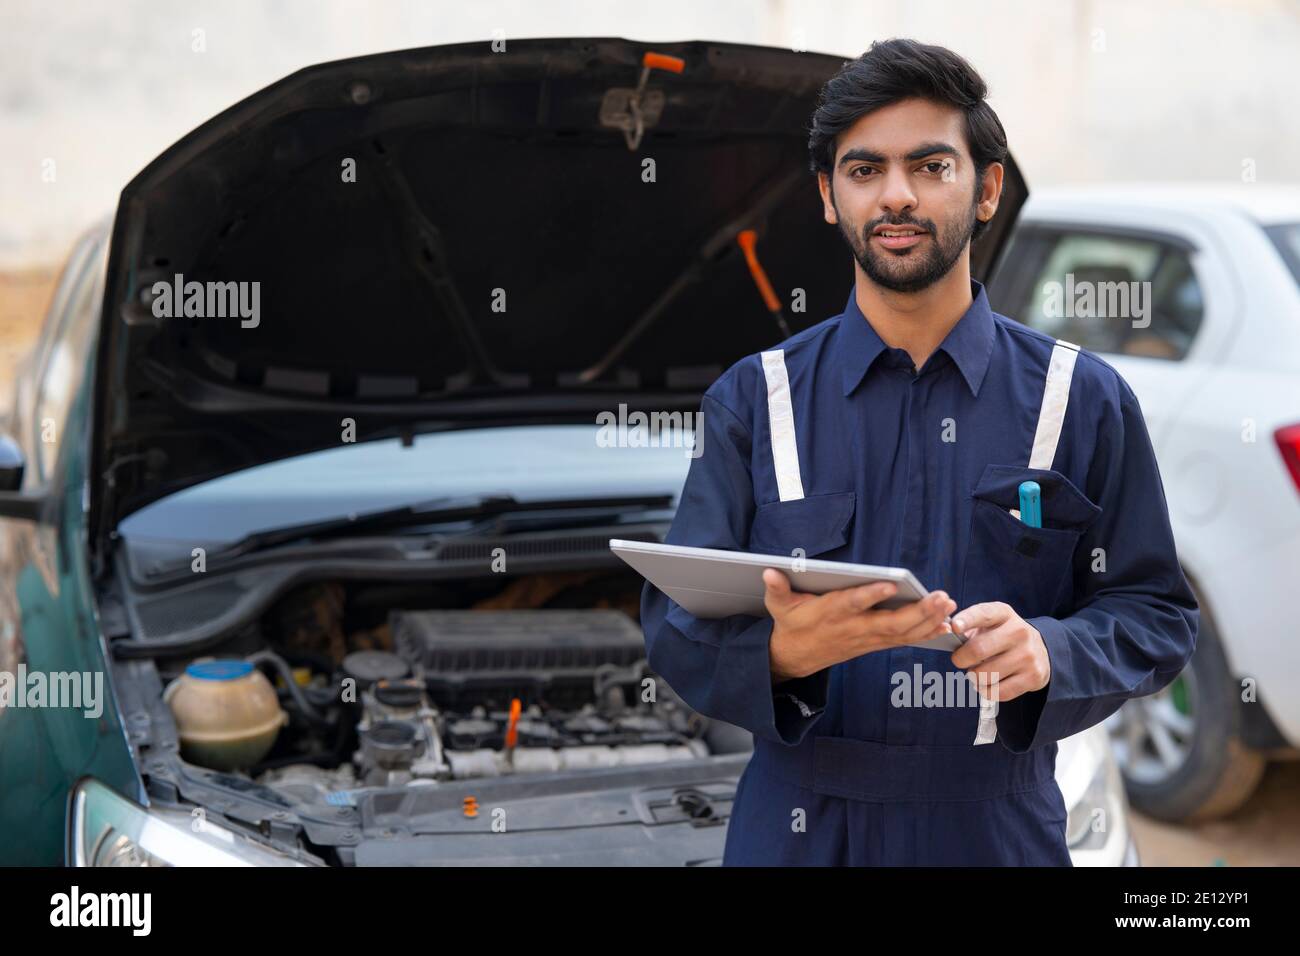 A YOUNG MECHANIC HOLDING DIGITAL TABLET STANDING IN FRONT OF A CAR TO REPAIR Stock Photo